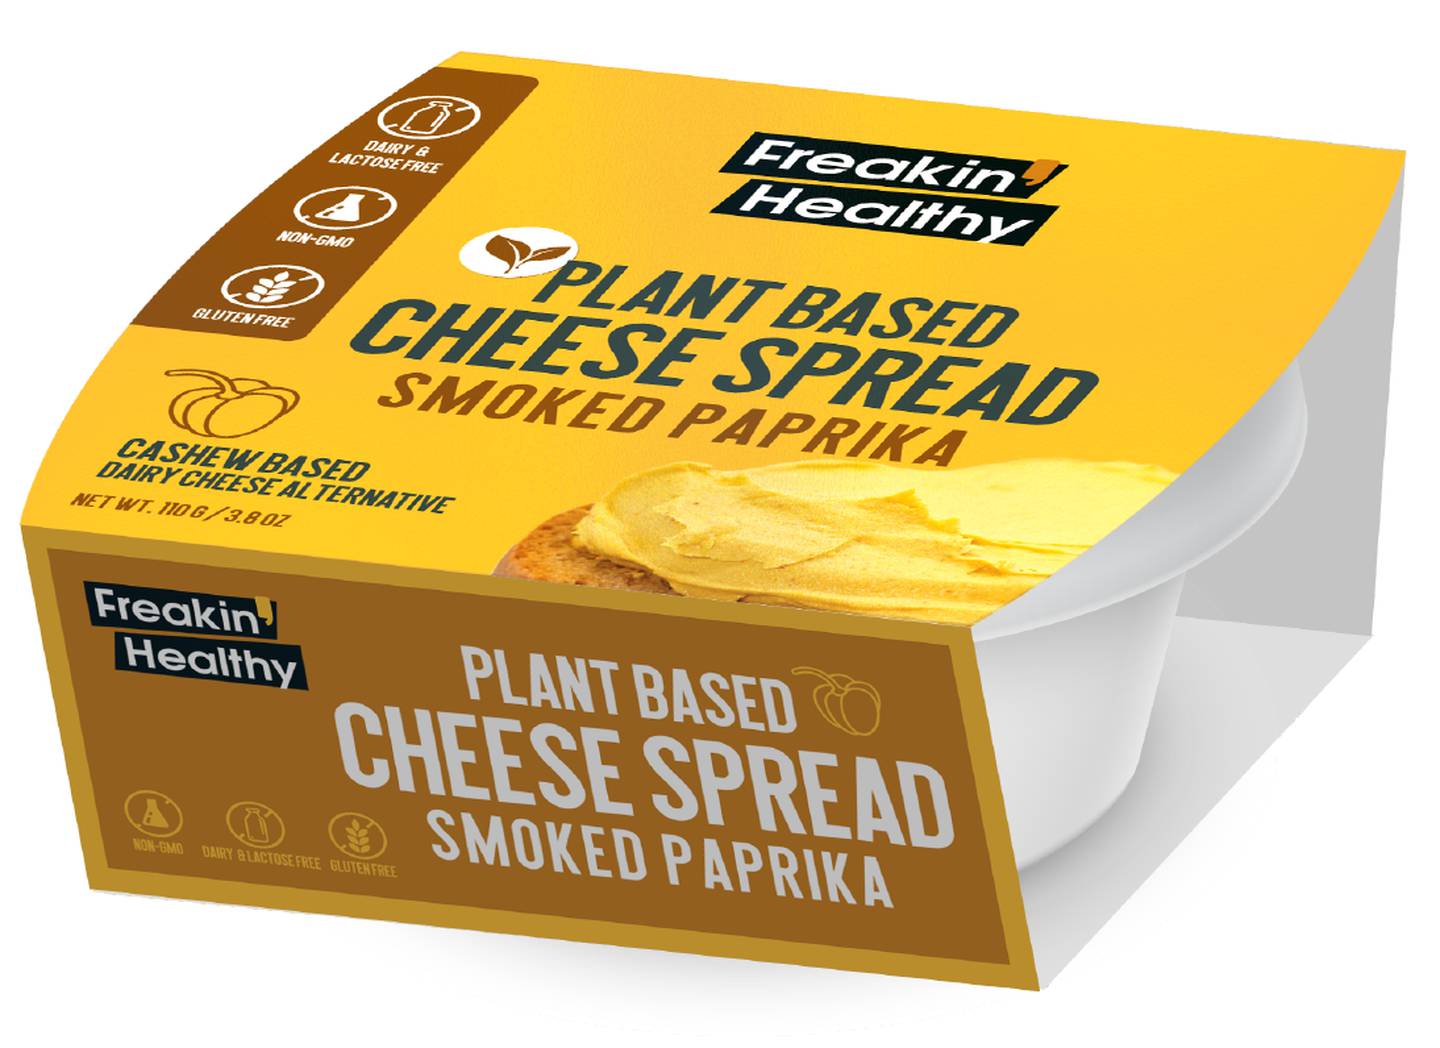 Freakin' Healthy is launching three flavors of plant-based spreadable cheese - Original, Chili Spice and Smoked Paprika.  Photo: Agthia